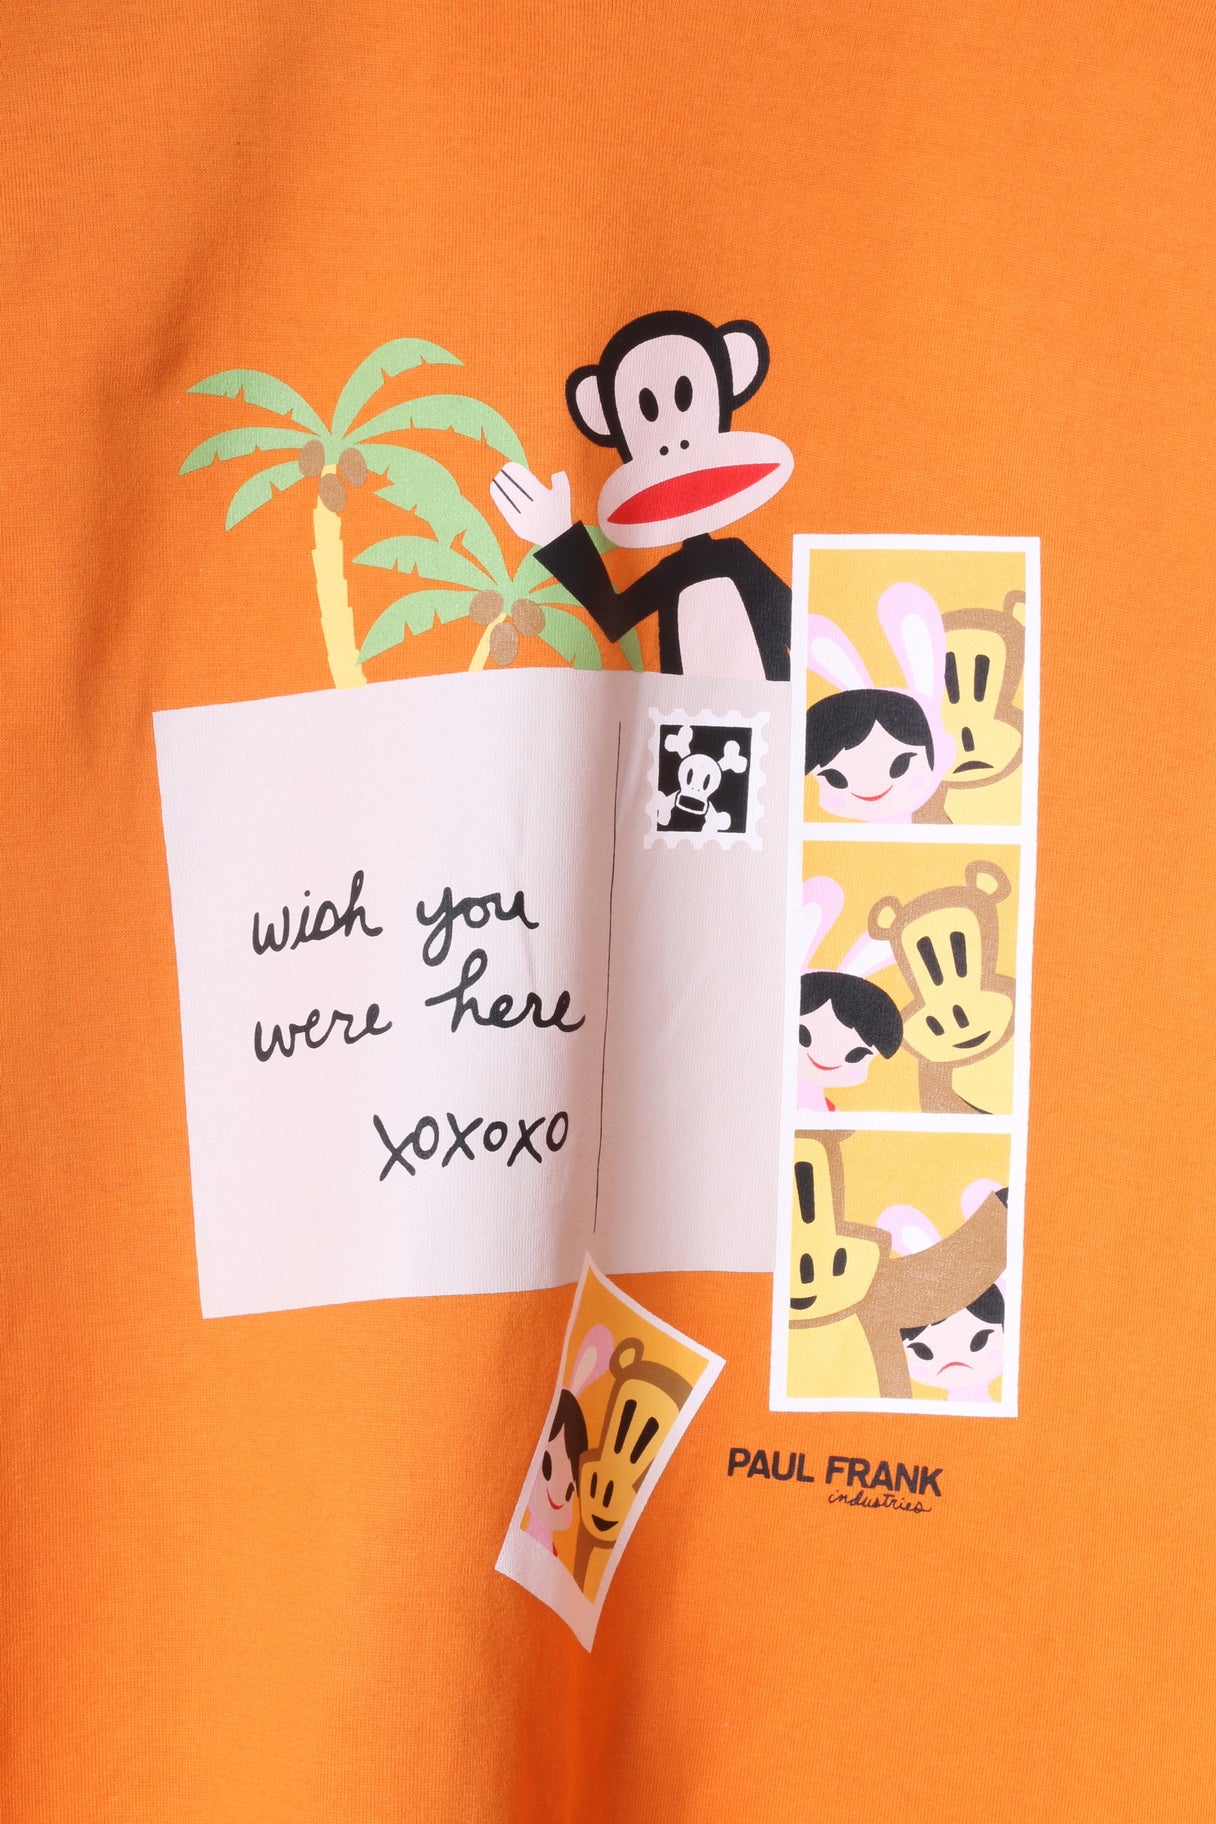 Paul Frank Boys XL 14 Age T-Shirt Orange Graphic Holiday Card Funny Top